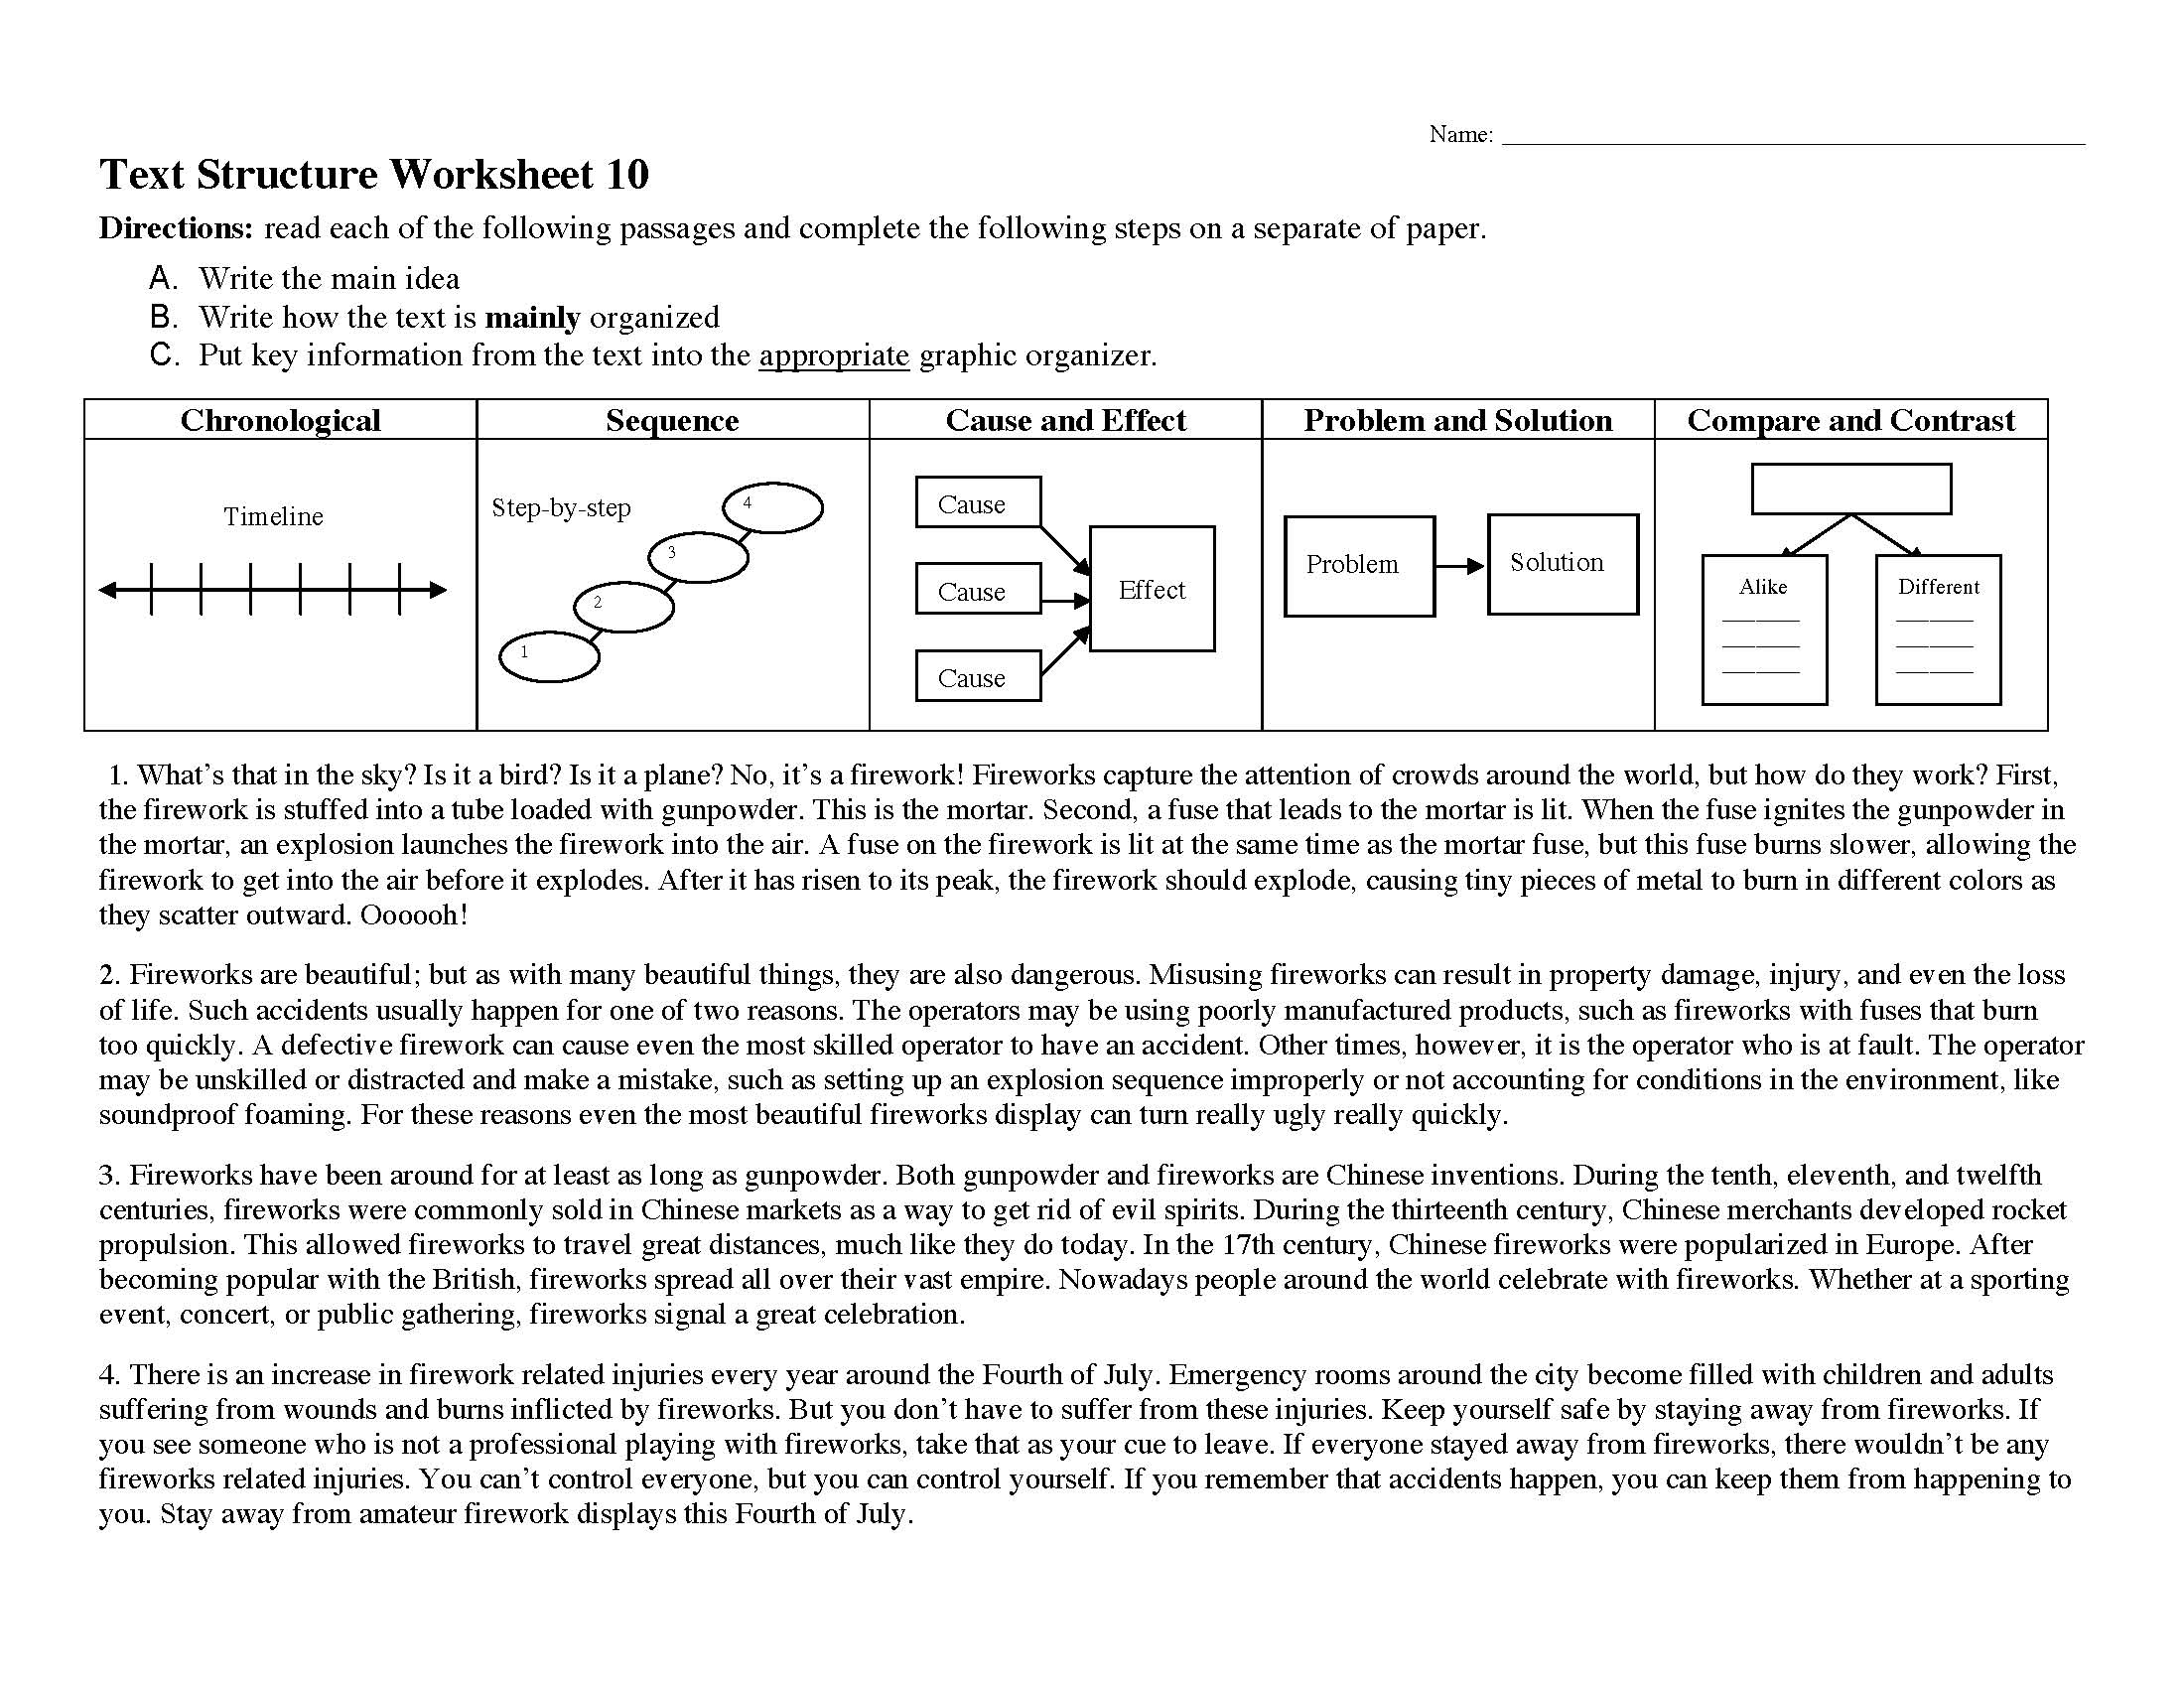 This is a preview image of Text Structure Worksheet 10. Click on it to enlarge it or view the source file.